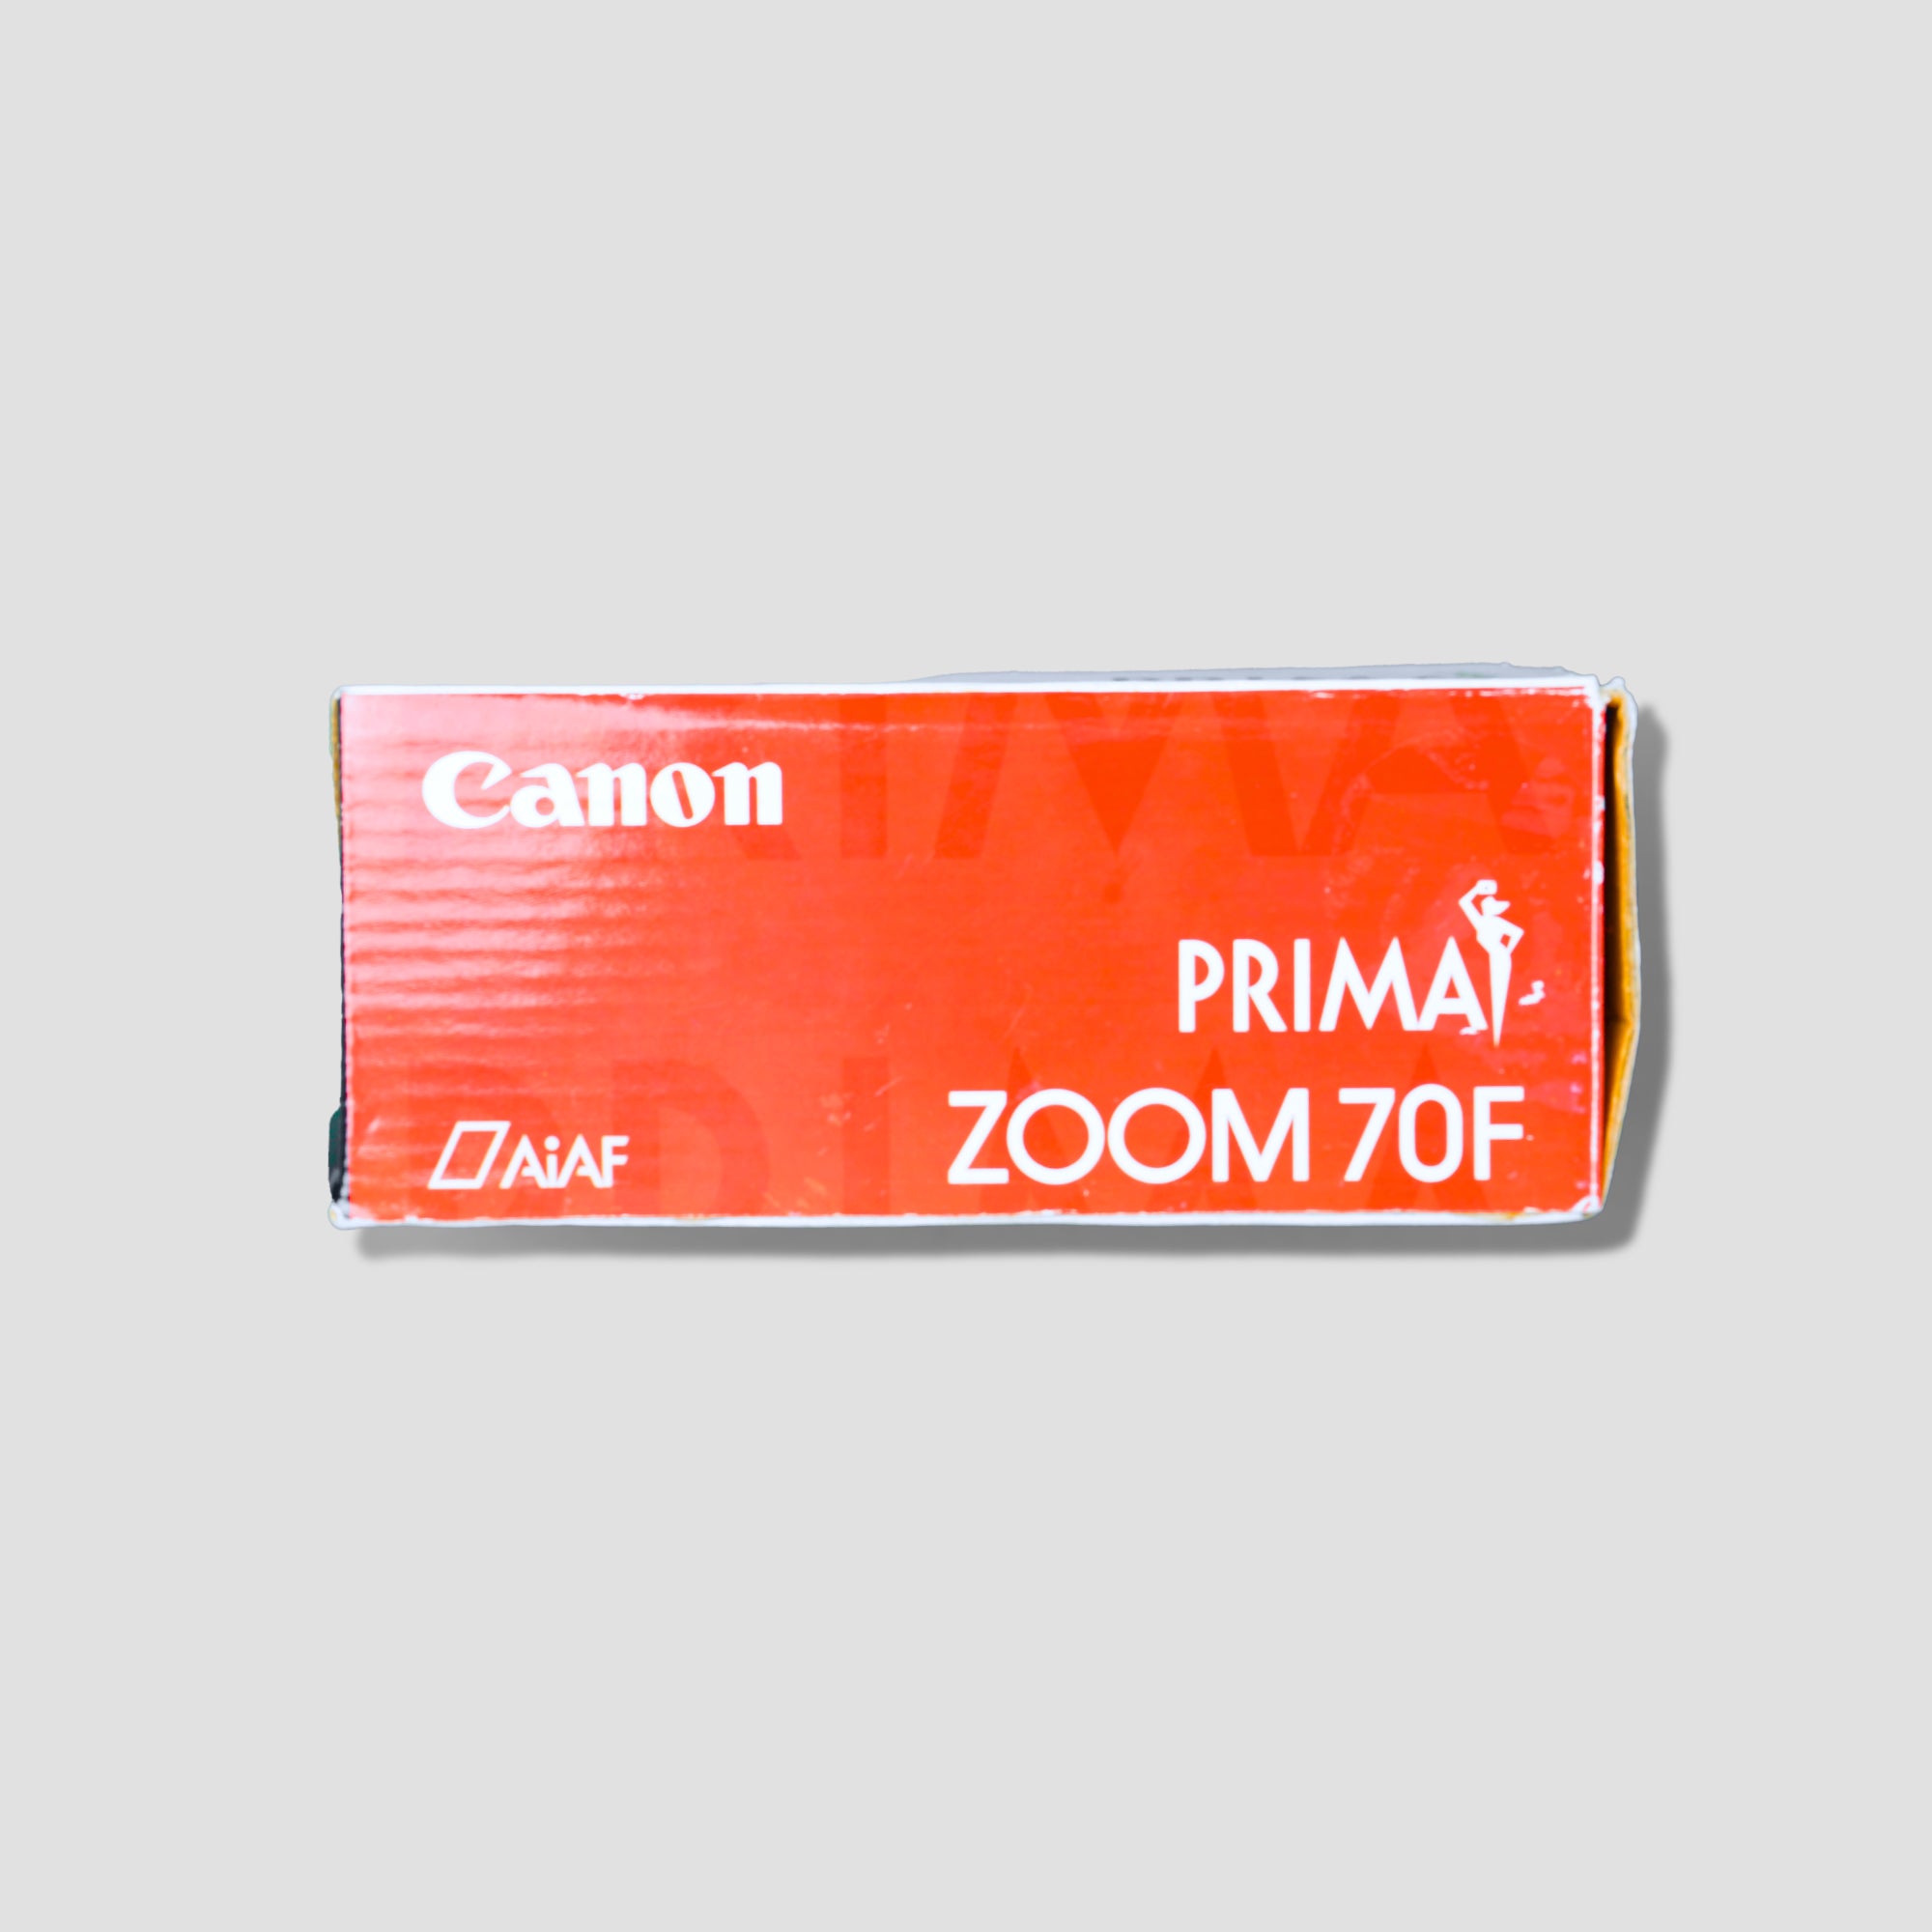 Buy Canon Prima Zoom 70F now at Analogue Amsterdam